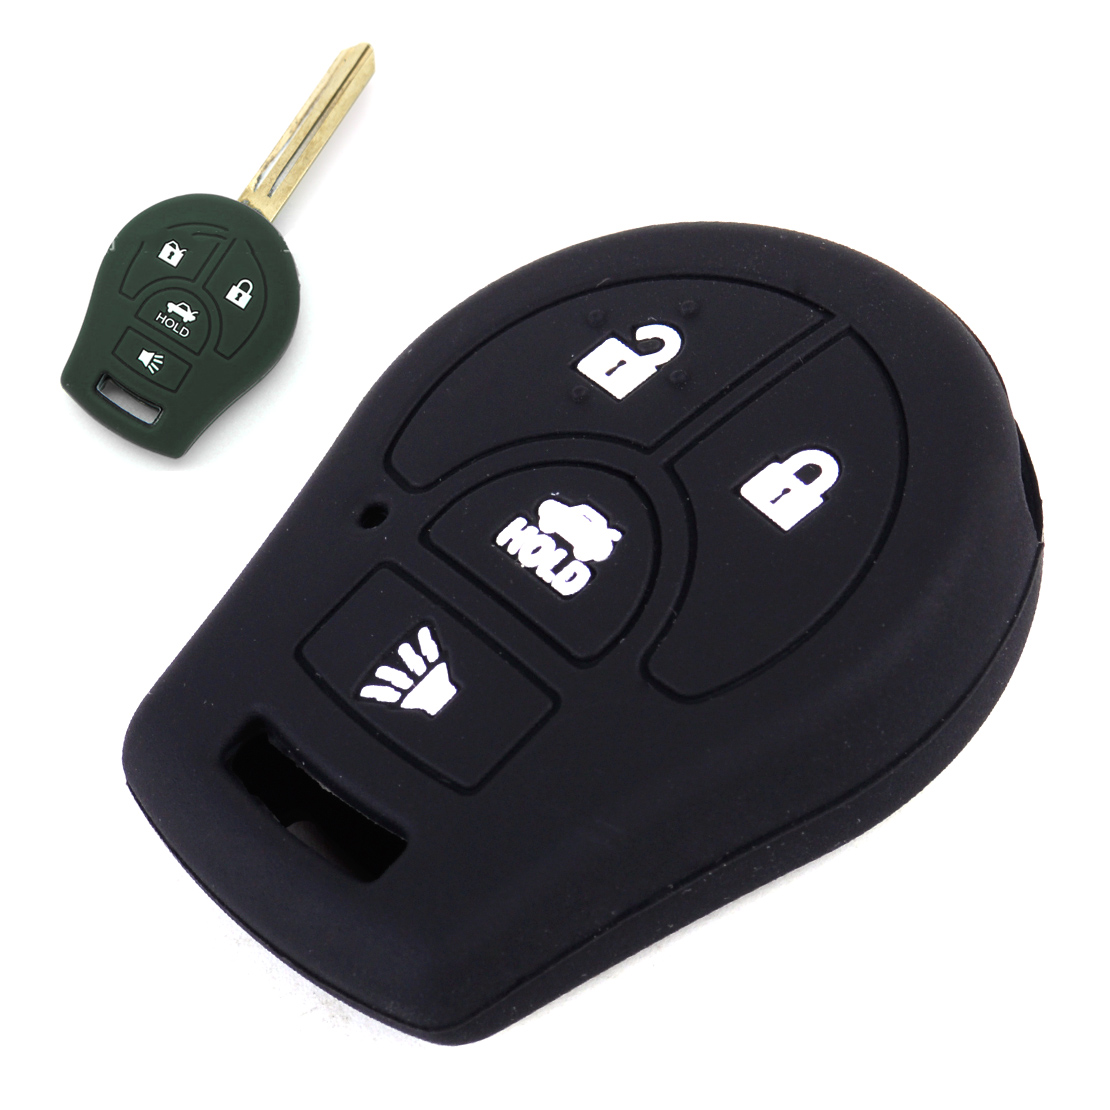 New 4 Buttons Silicone Remote Key Cover Fob Case For Nissan Altima Rogue Sentra